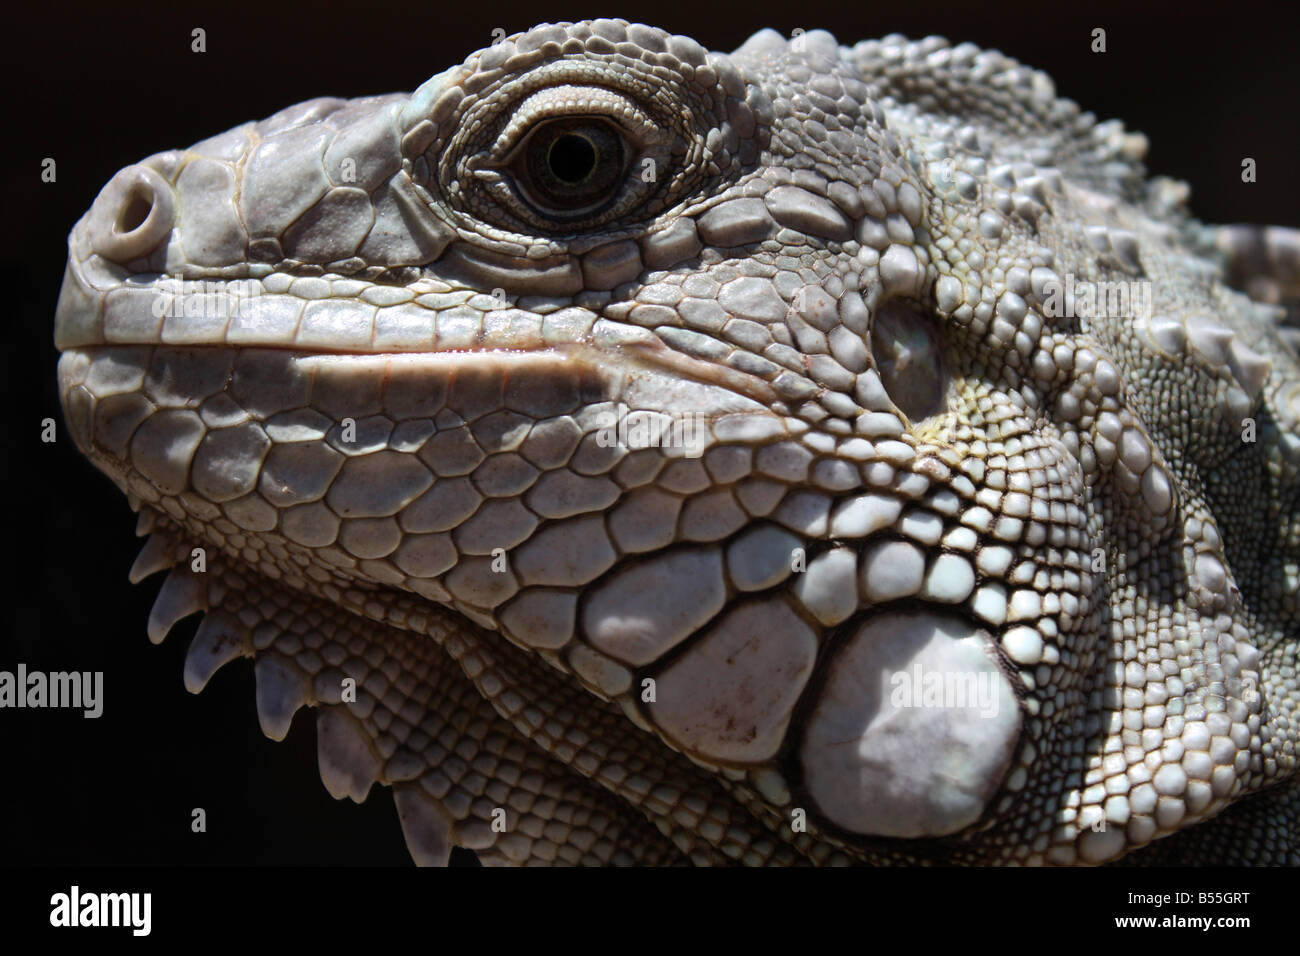 USA, Iguana is a genus of lizard native to tropical areas of Central and South America and the Caribbean. Stock Photo